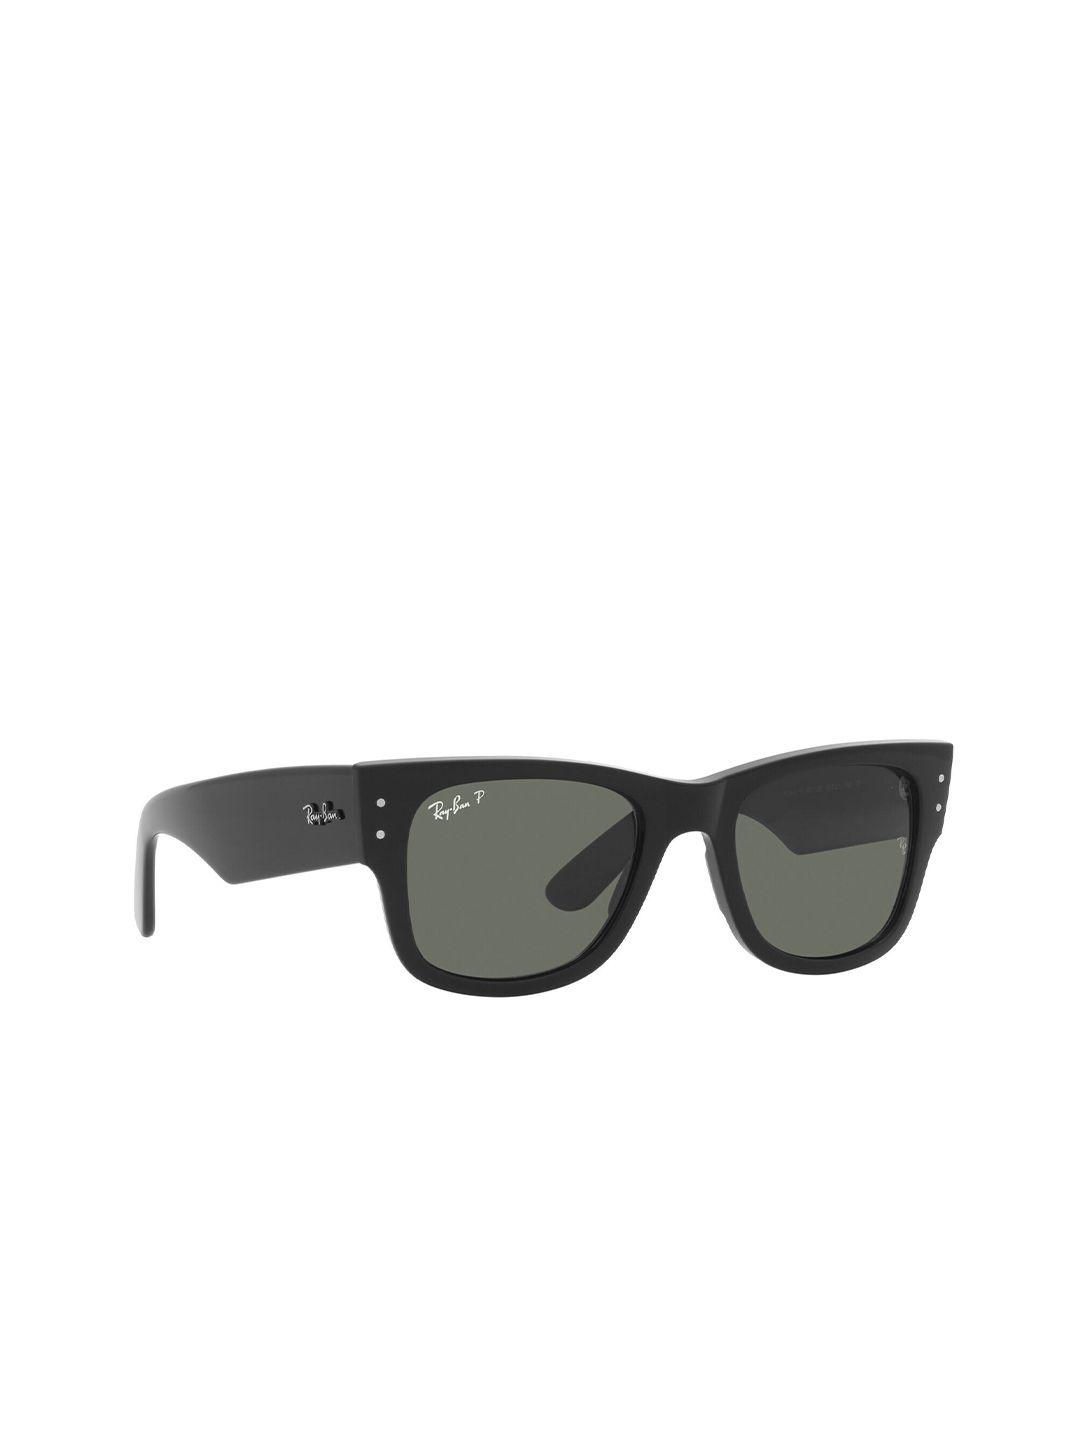 ray-ban square sunglasses with polarised lens